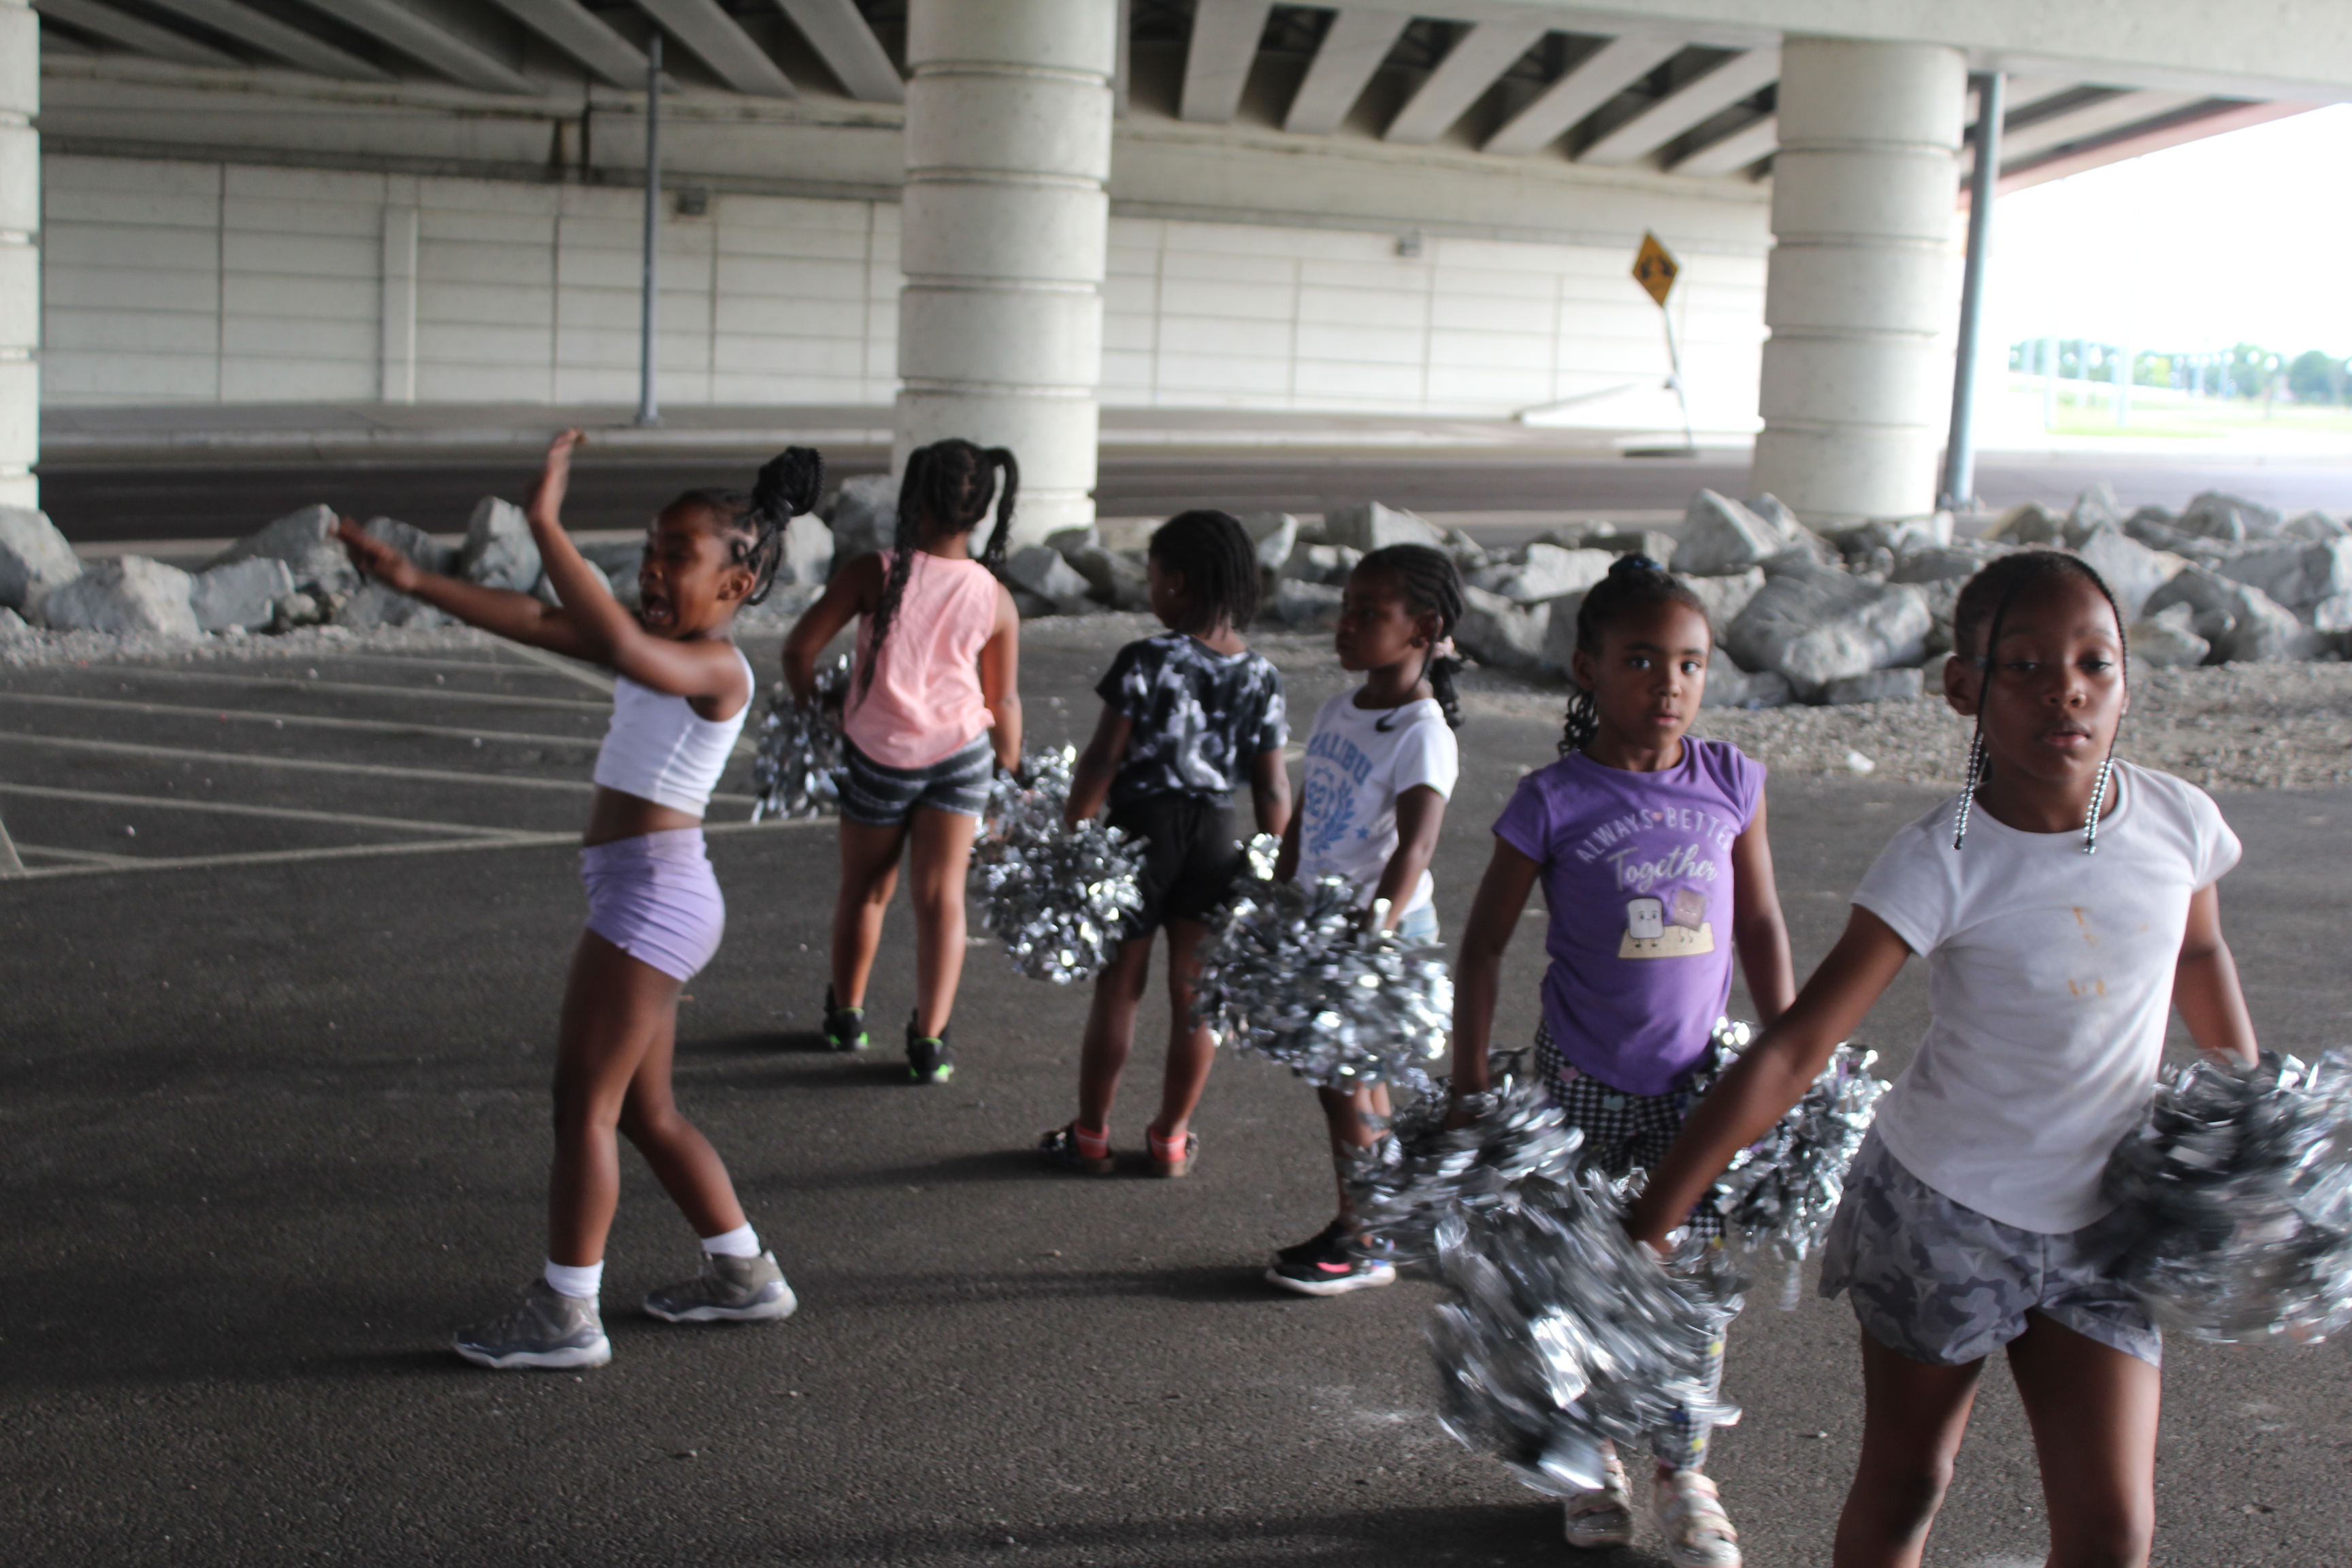 Members of the Western Stars Drill Team & Drum Line practice in a parking lot in downtown Dayton.  CORNELIUS FROLIK / STAFF